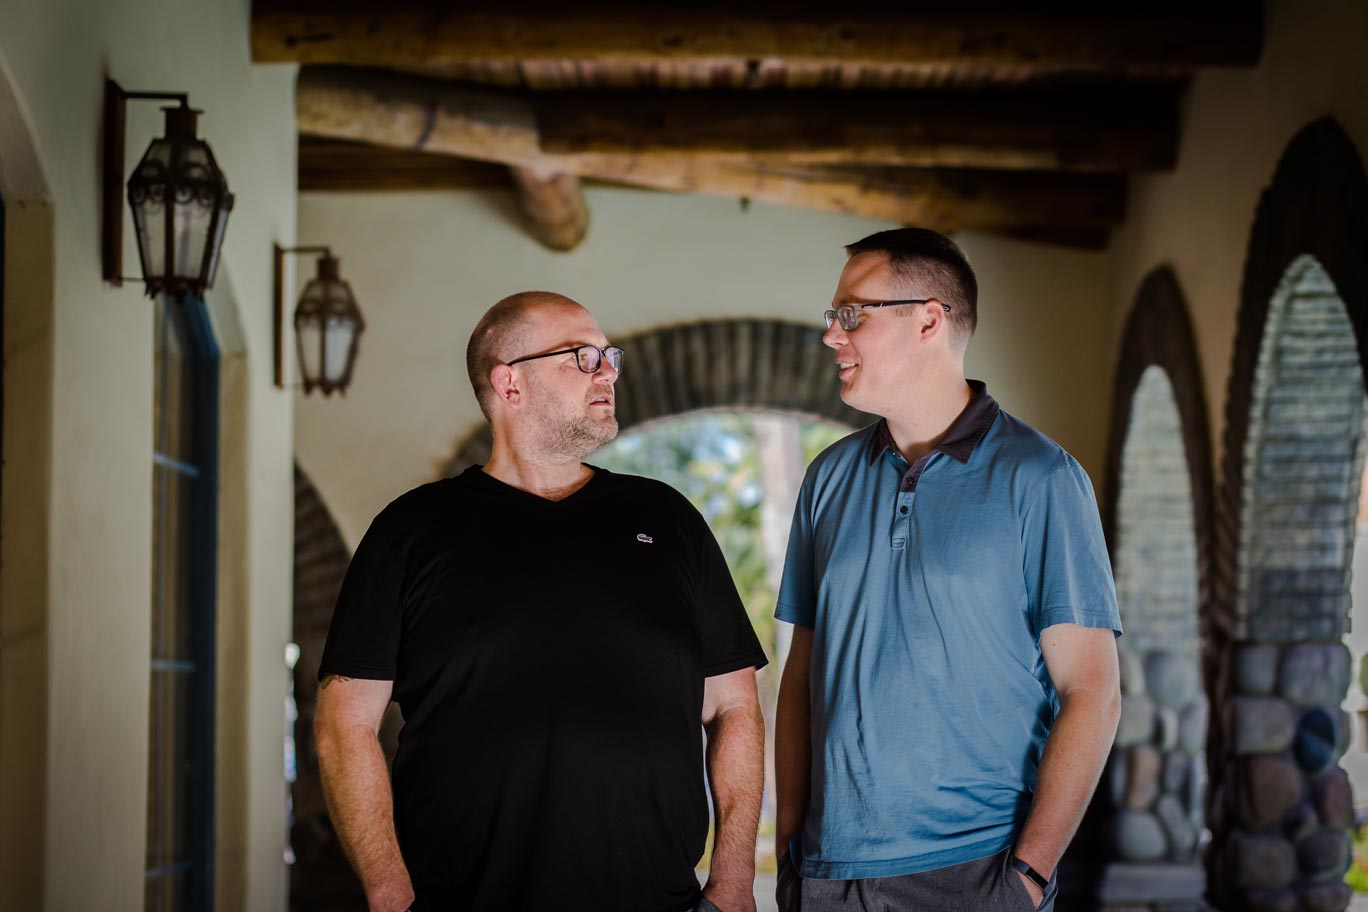 kevin-and-fred-looking-at-each-other-for-serious-pose-during-brand-photography-session-in-tempe-az-by-prefocus-solutions